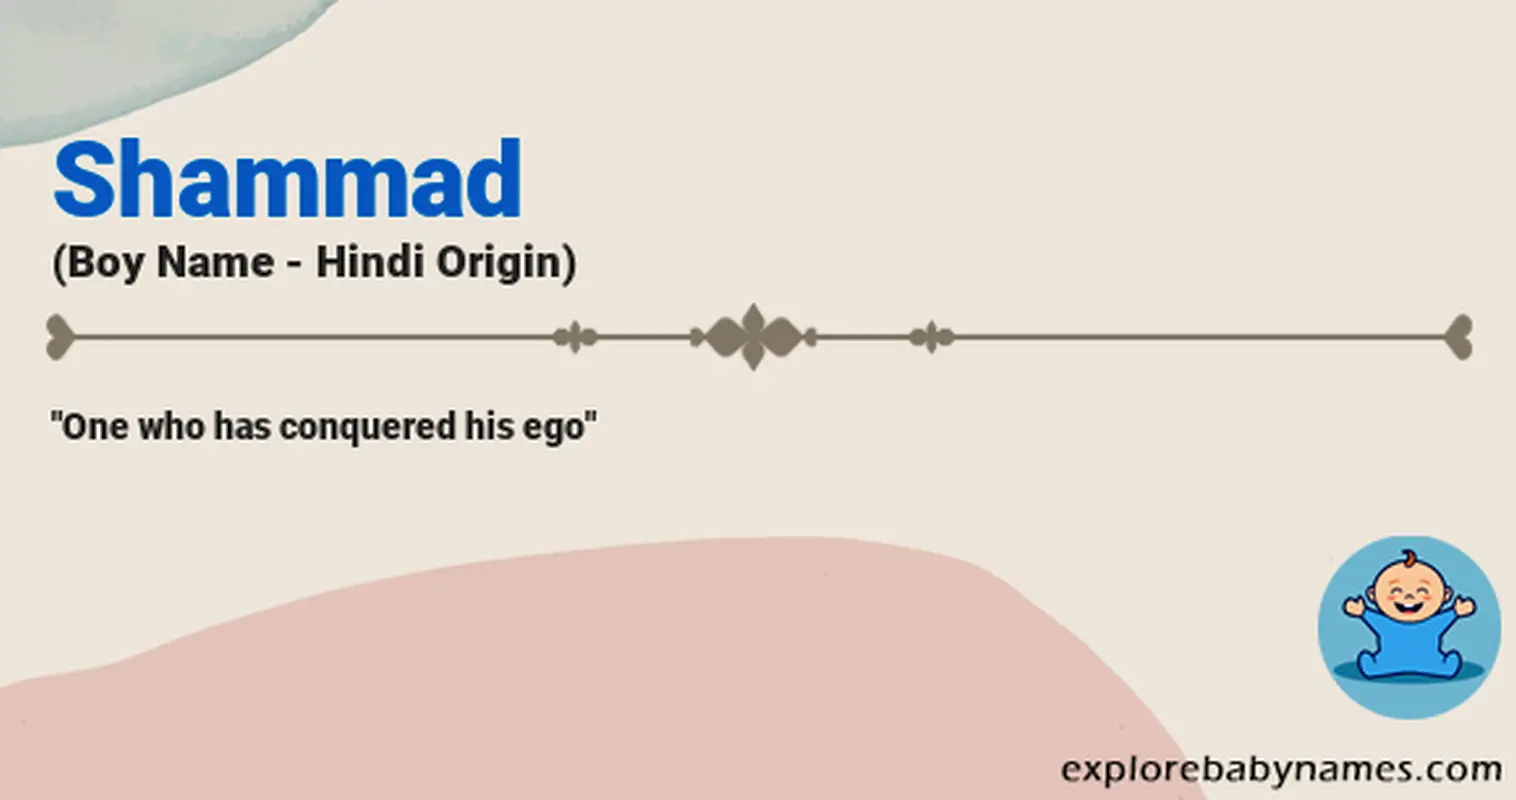 Meaning of Shammad